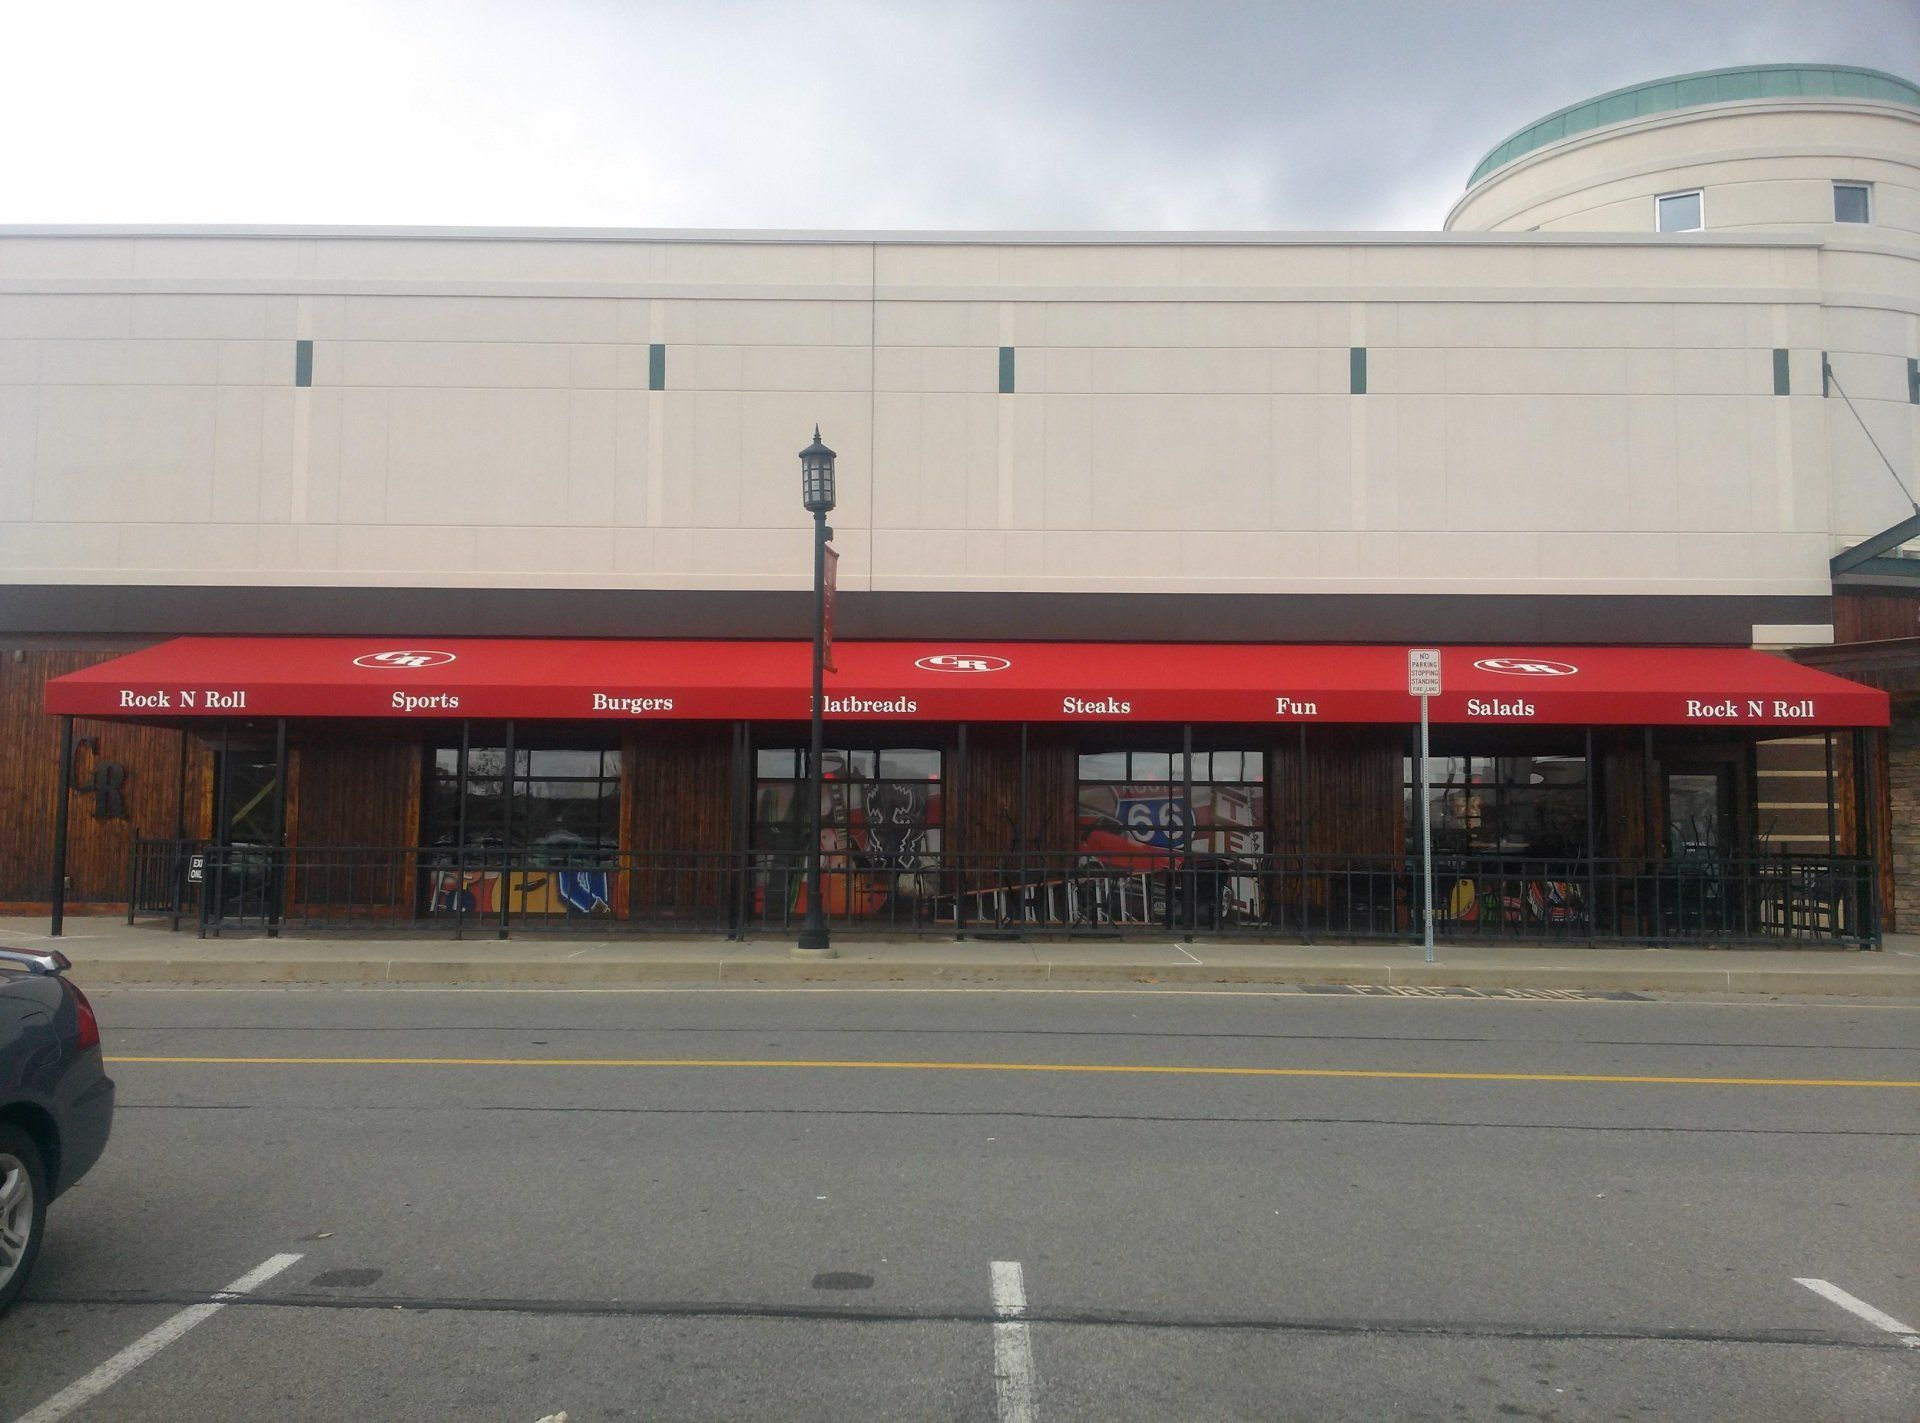 Commercial awning-8 — Custom awnings in Pittsburgh, PA